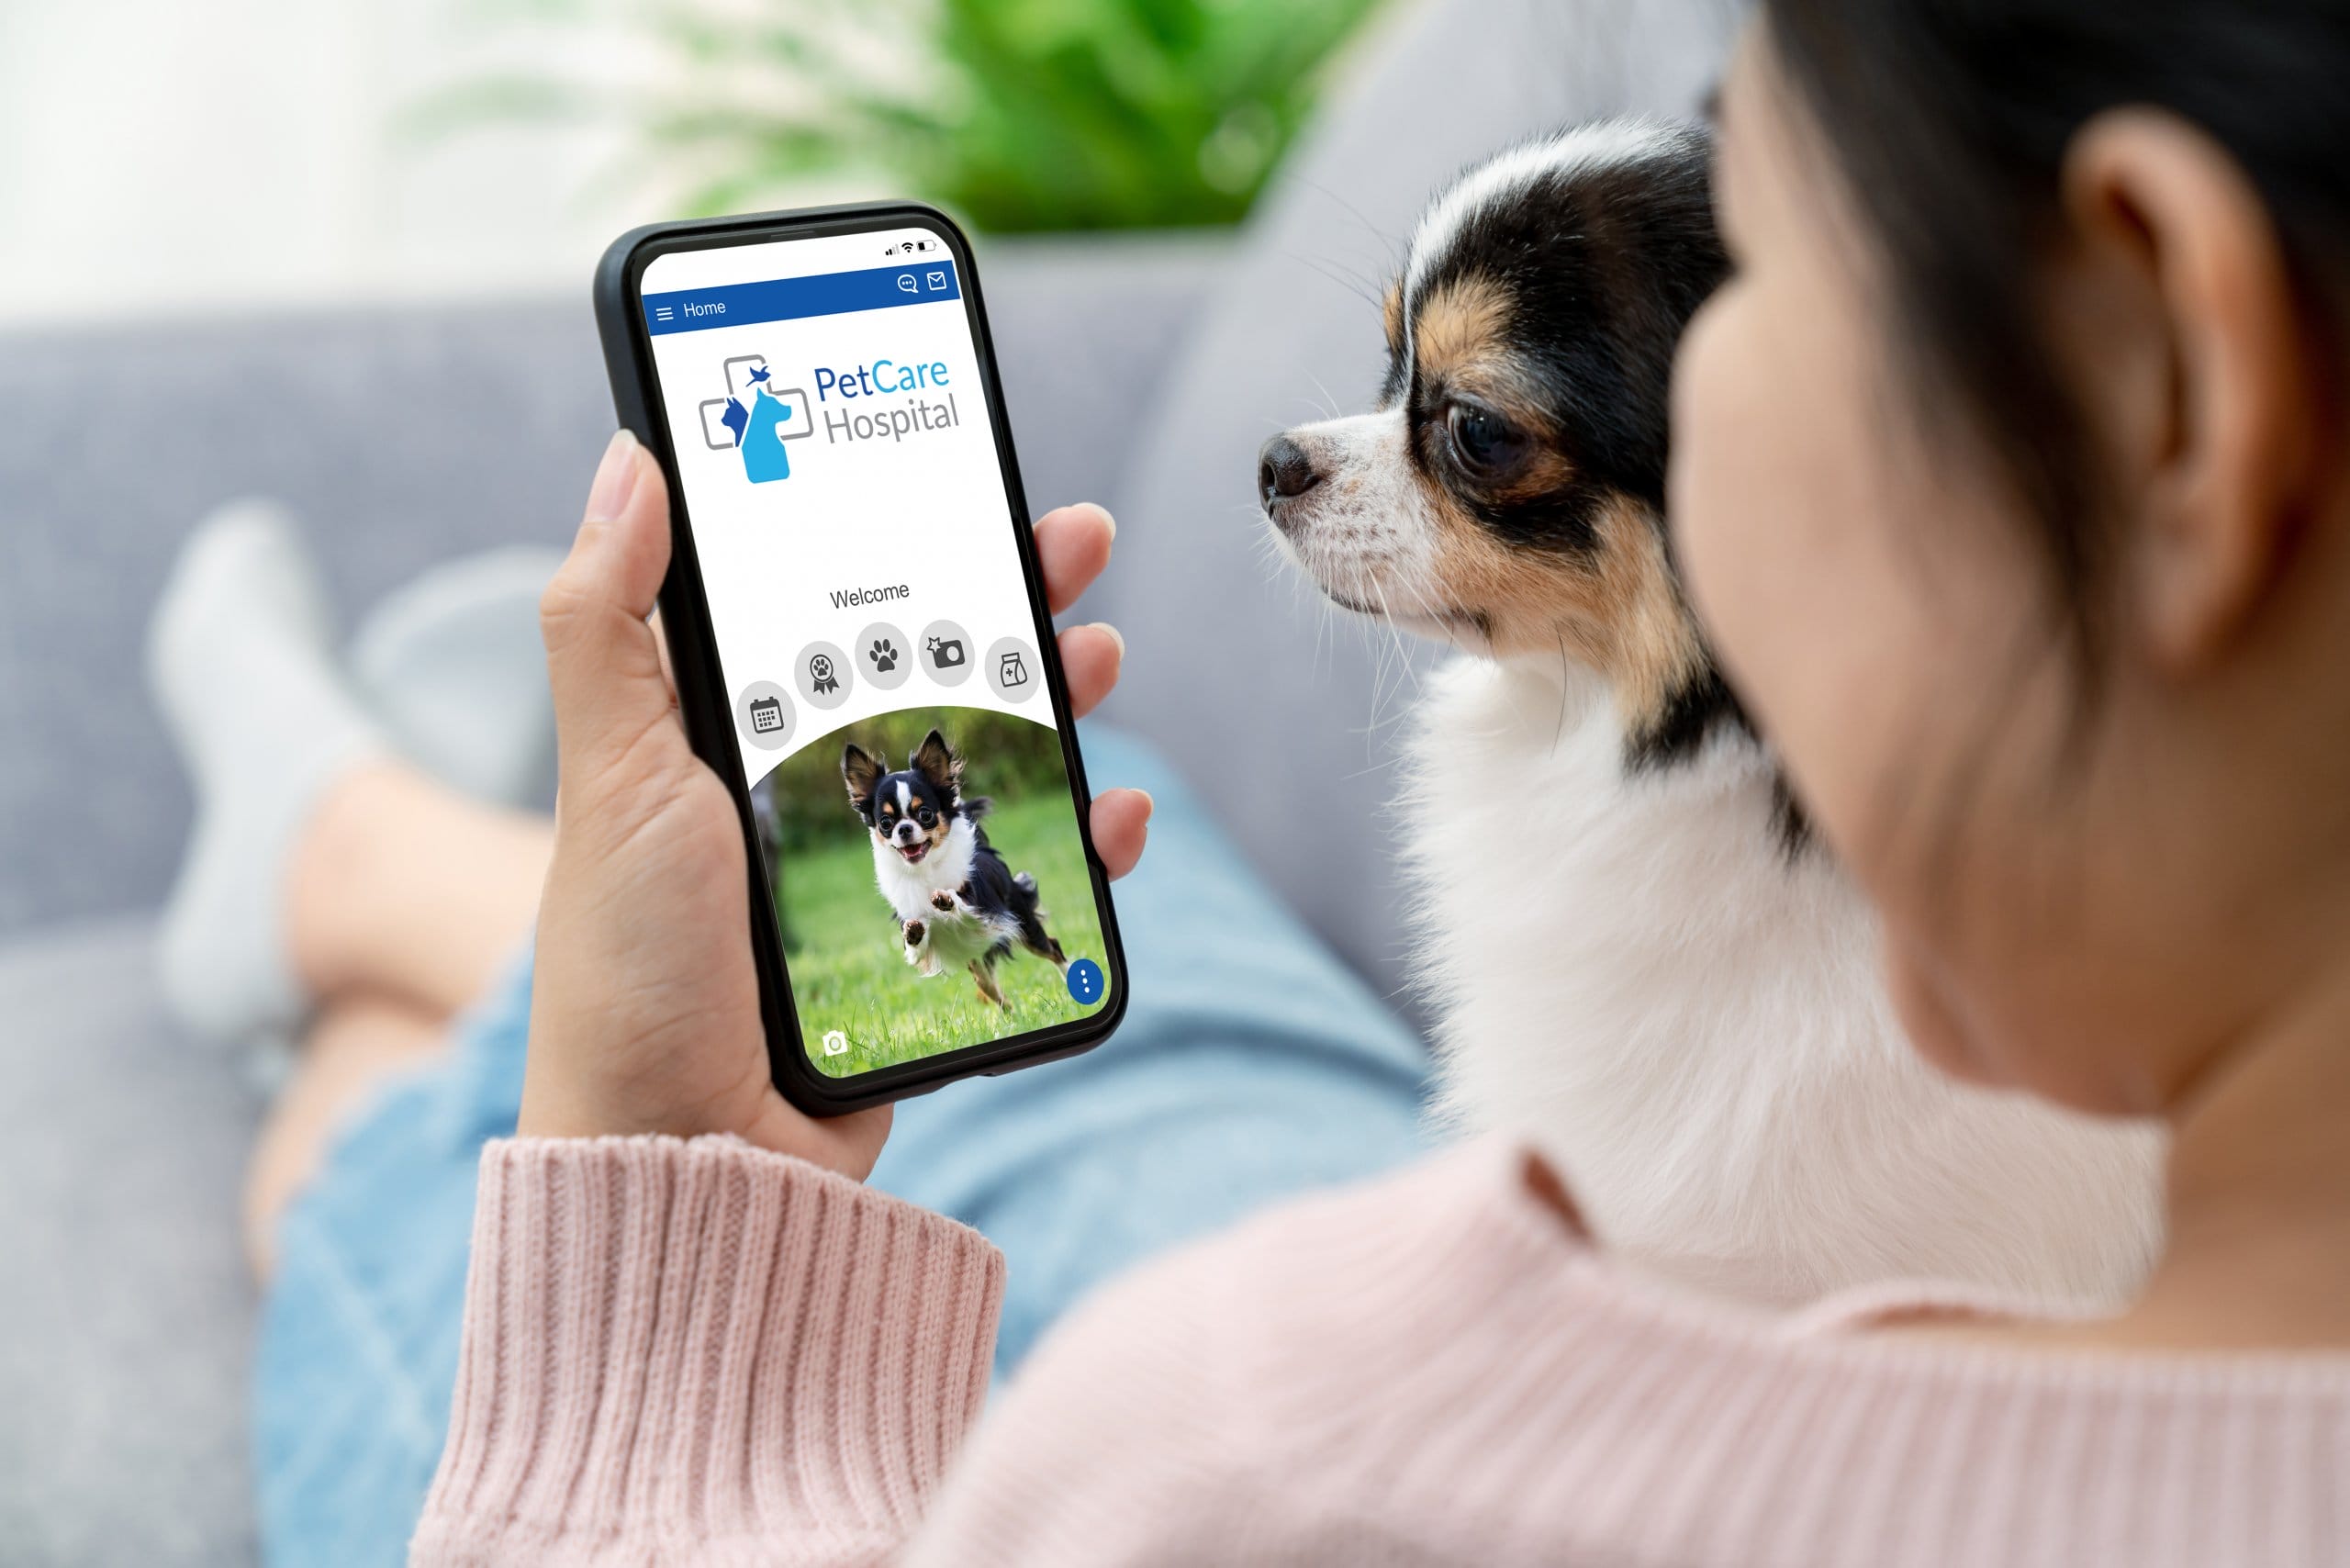 Puppy's Caring Pet Veterinary - Apps on Google Play